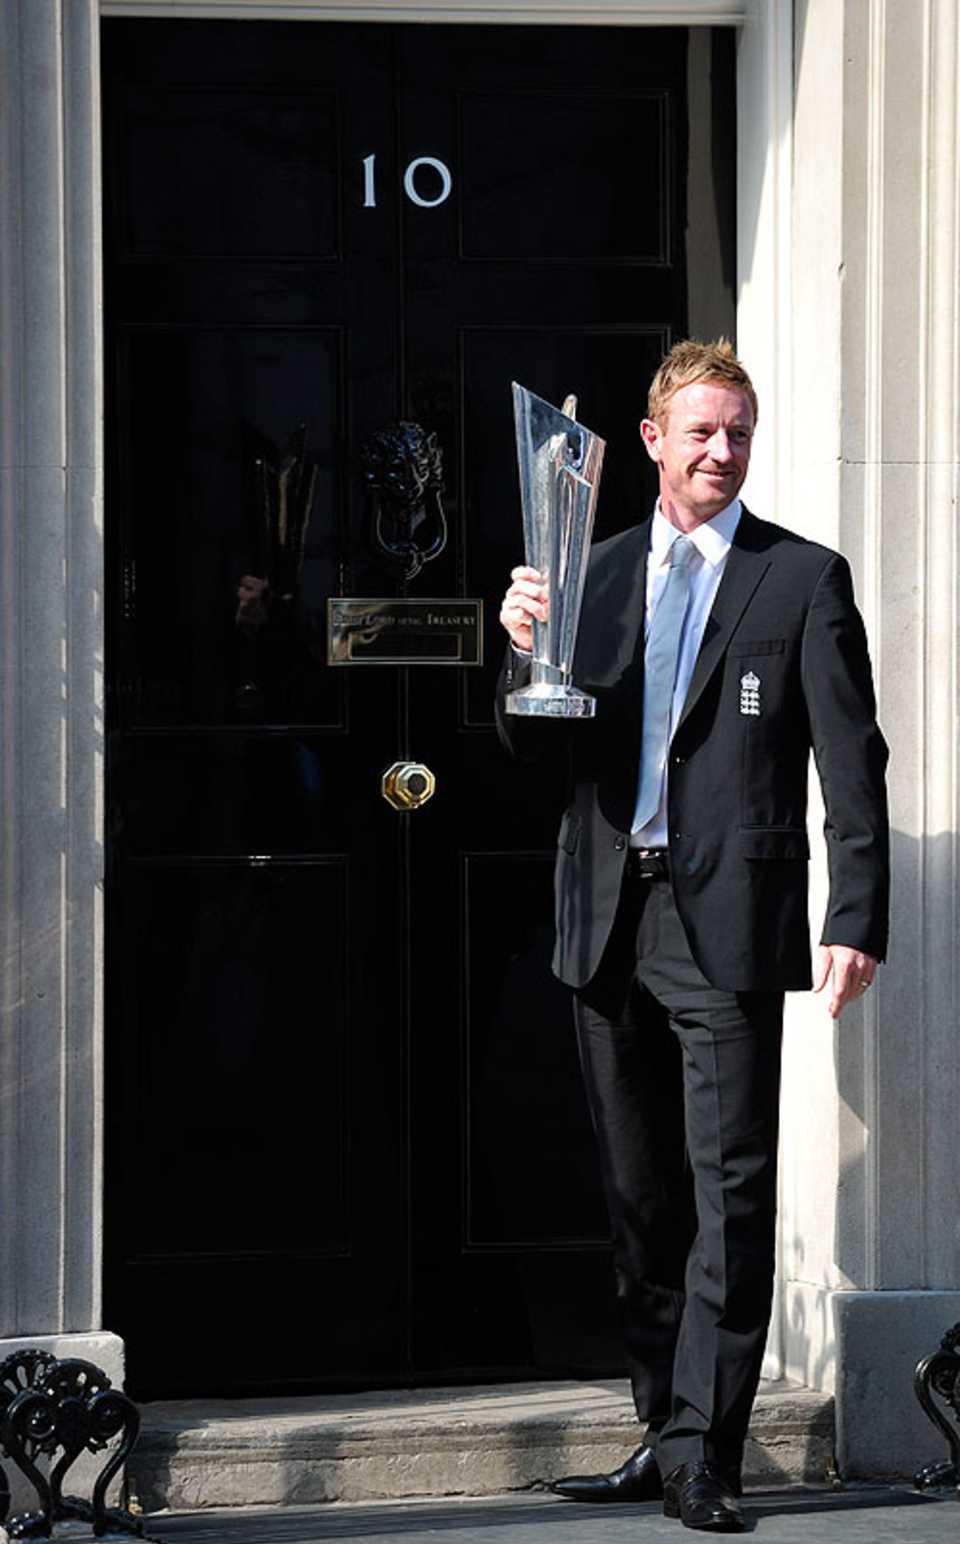 Paul Collingwood poses with the World Twenty20 trophy outside No. 10 Downing Street